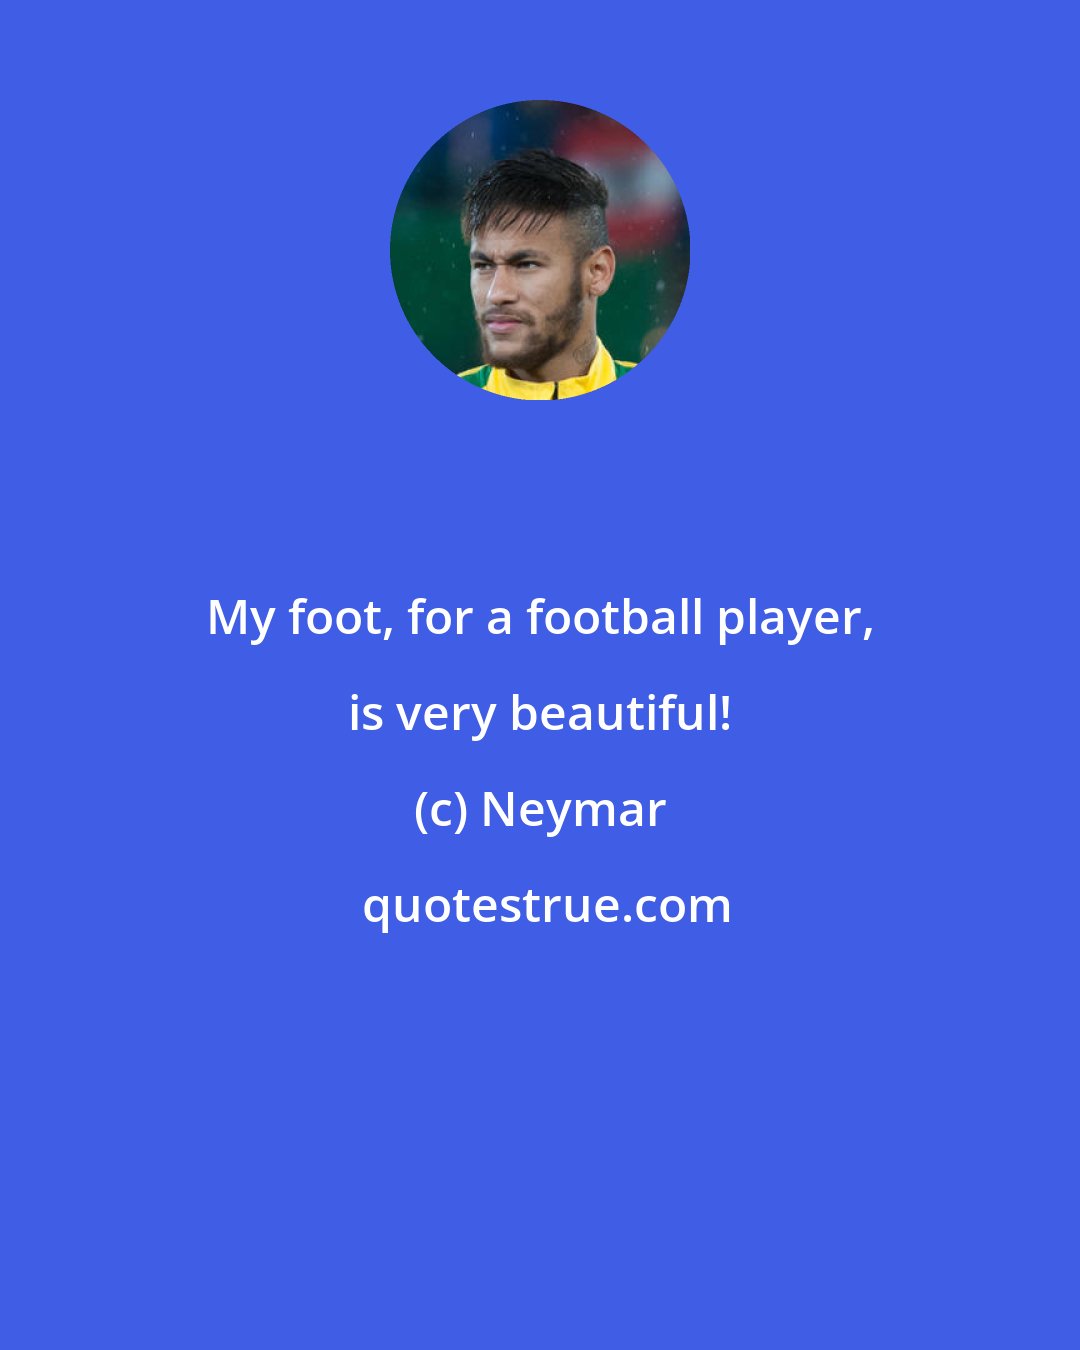 Neymar: My foot, for a football player, is very beautiful!